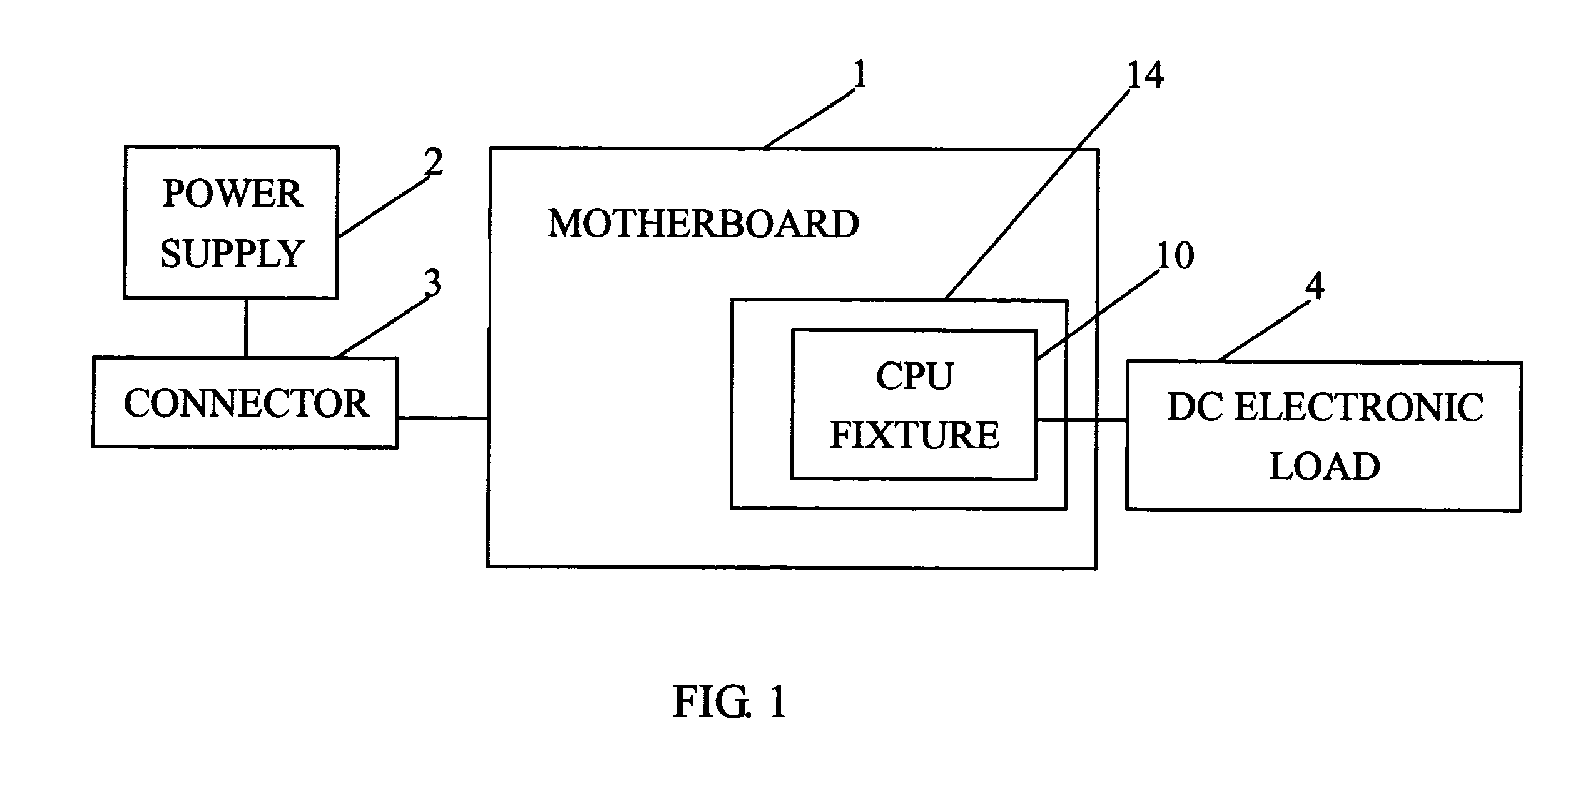 Method for estimating power consumption of a CPU